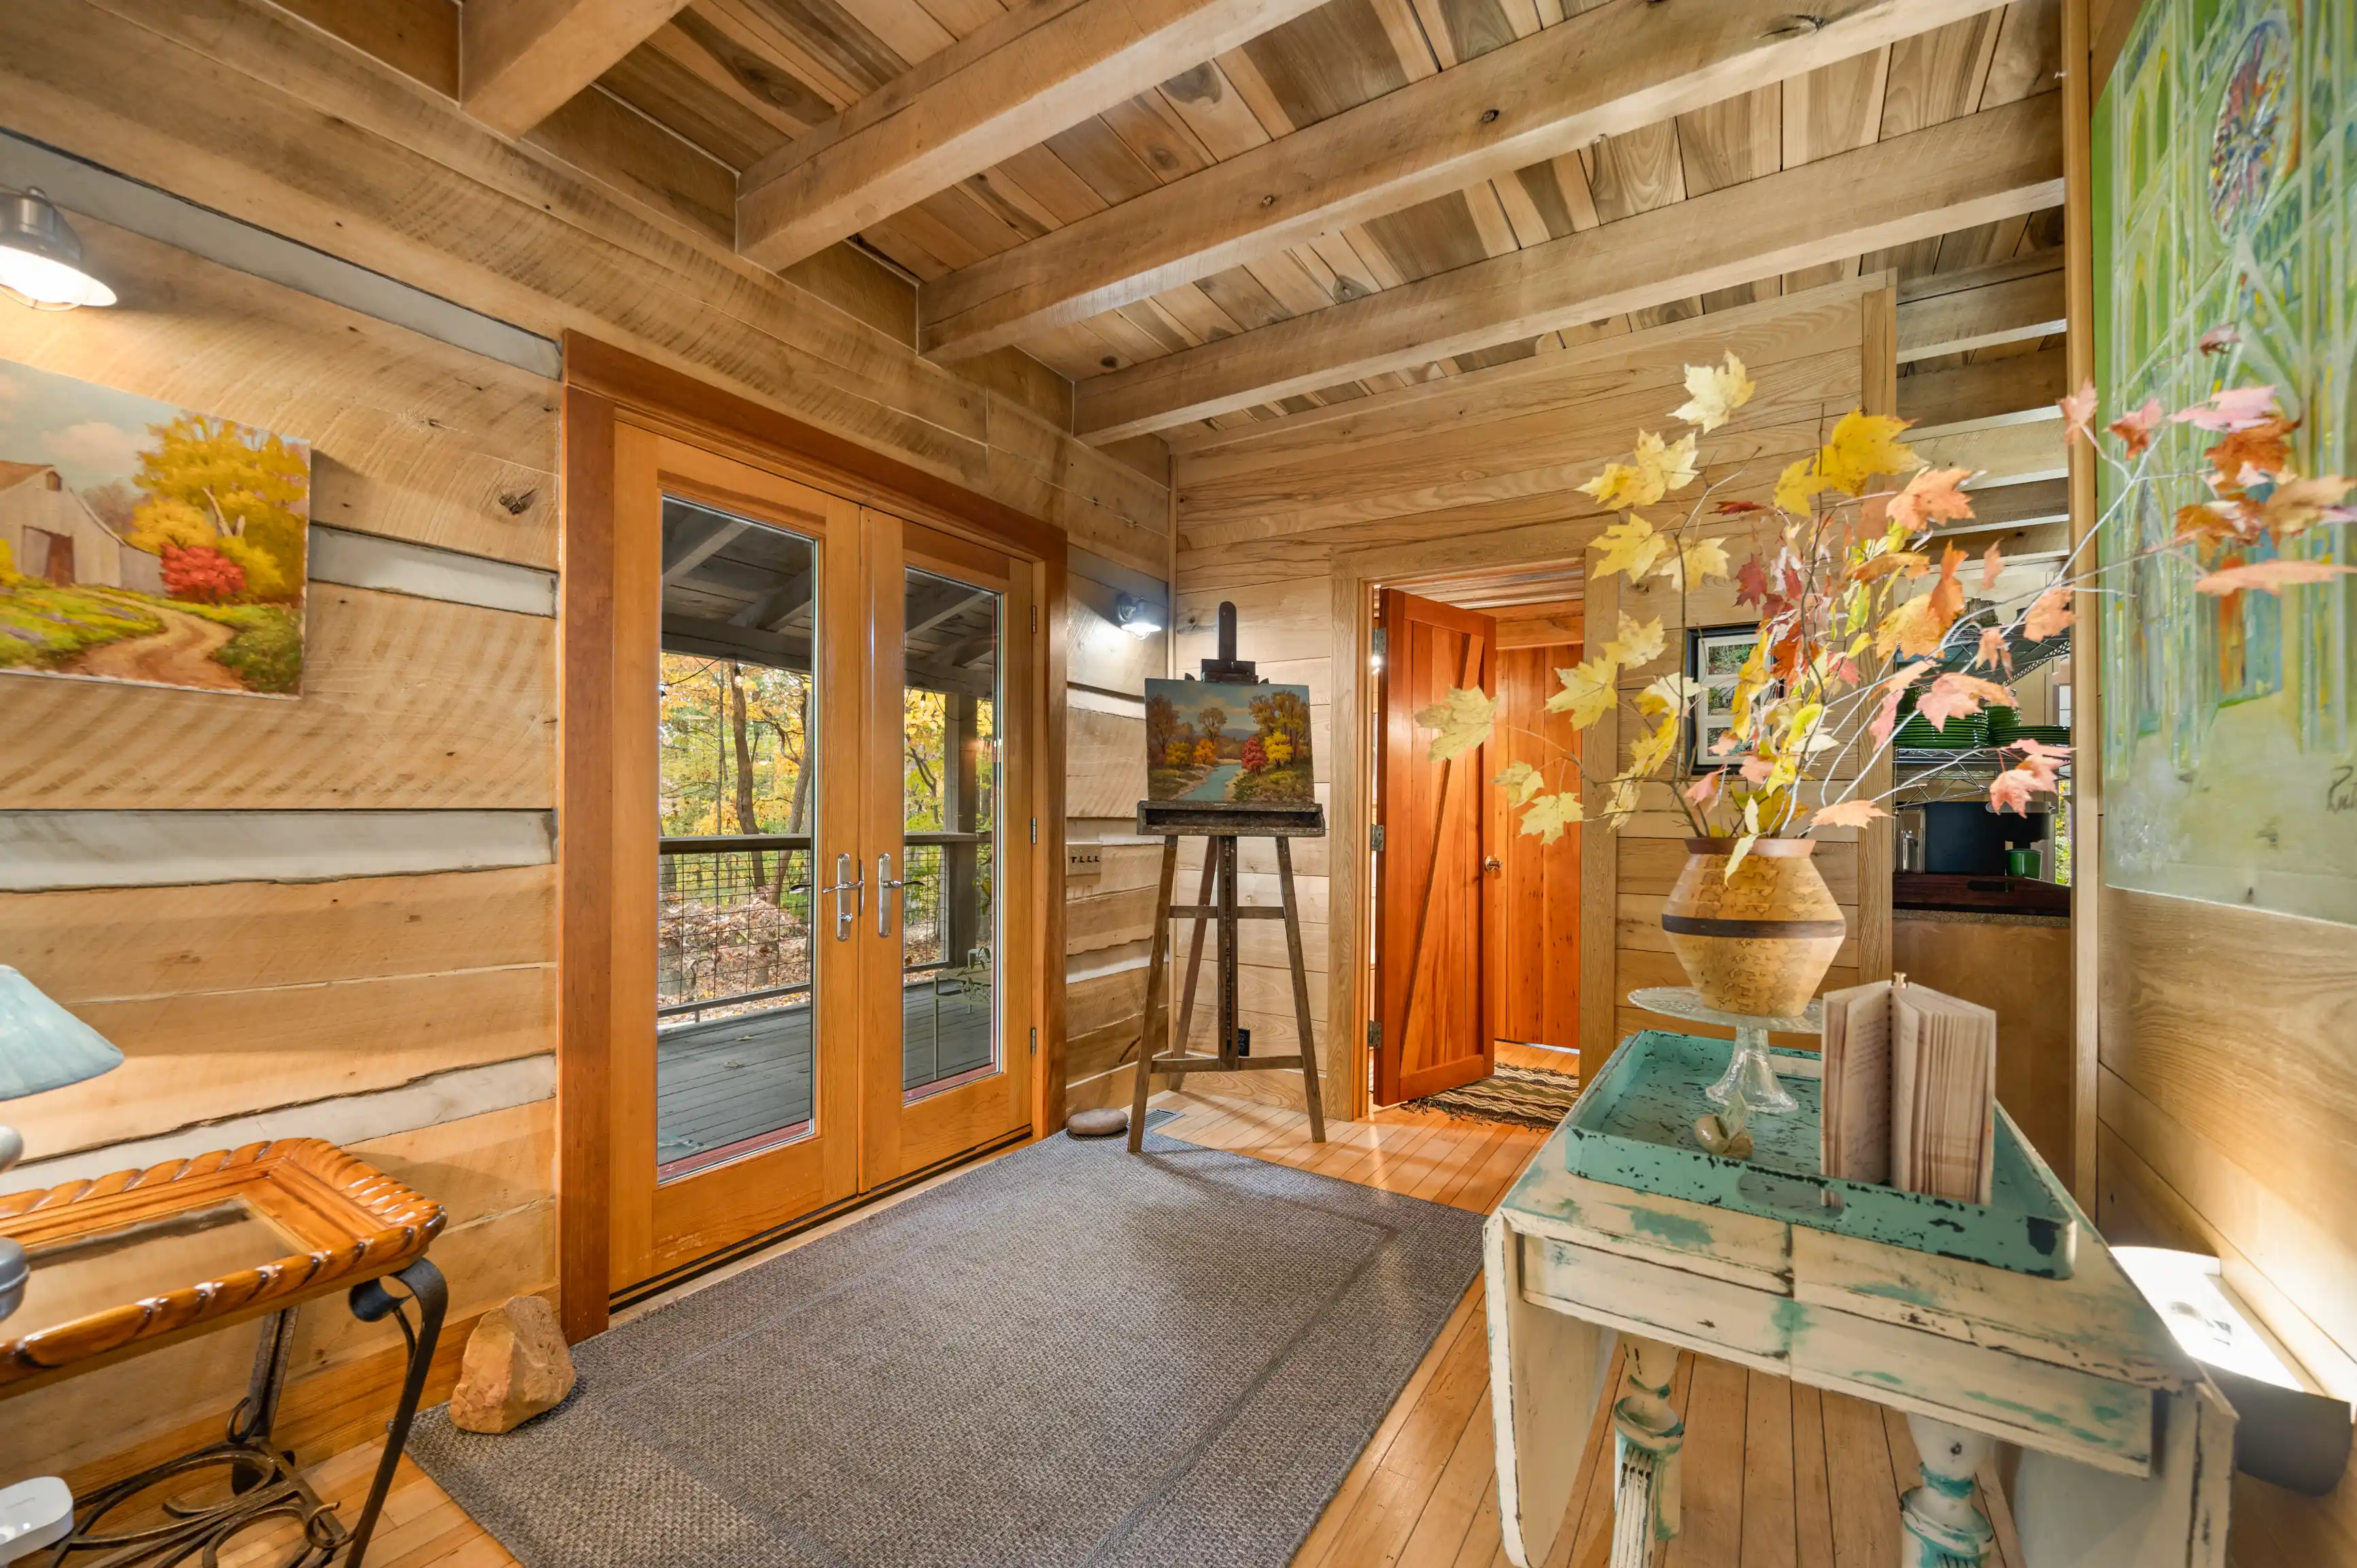 Interior of a cozy wooden cabin with autumn-inspired decorations, featuring a large glass door, a painting on an easel, and a rustic table with a vase of fall leaves.